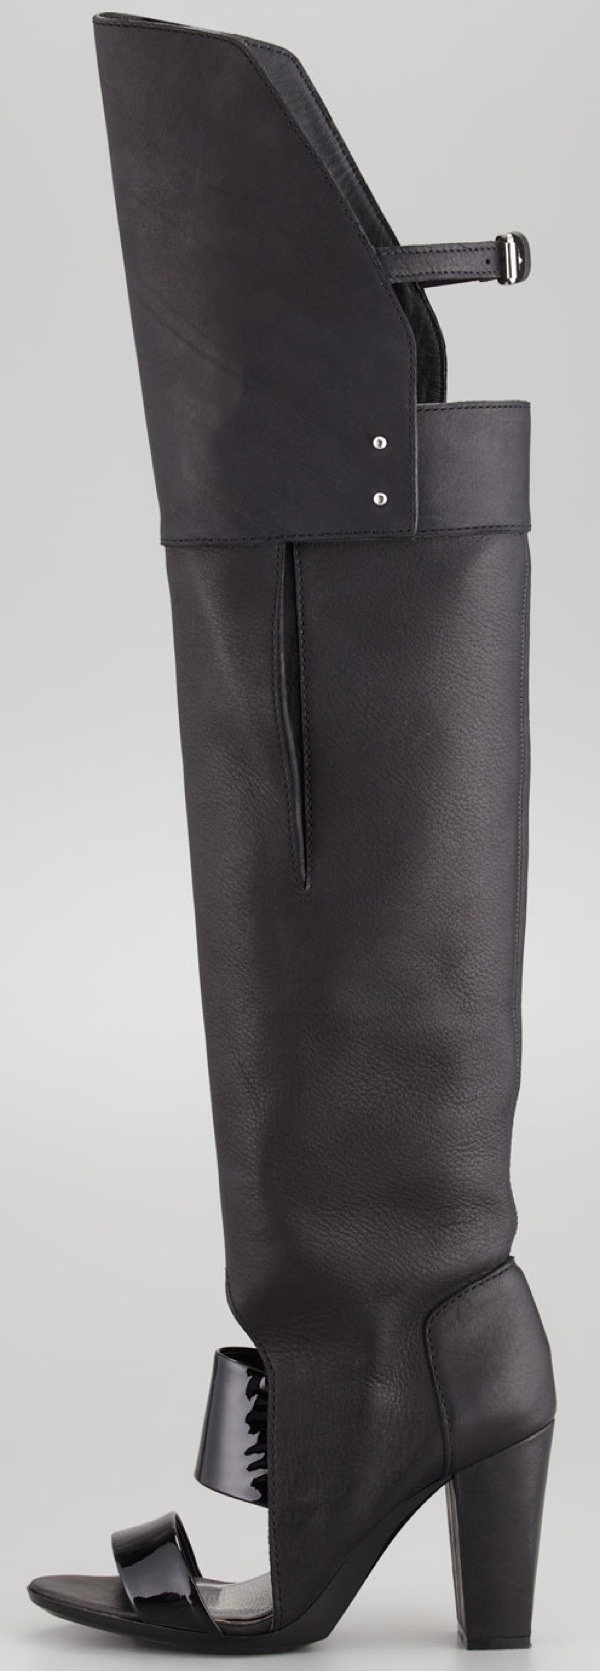 3.1 Phillip Lim Runway Ora Over-the-Knee Boot, Black $850.00 Outstep